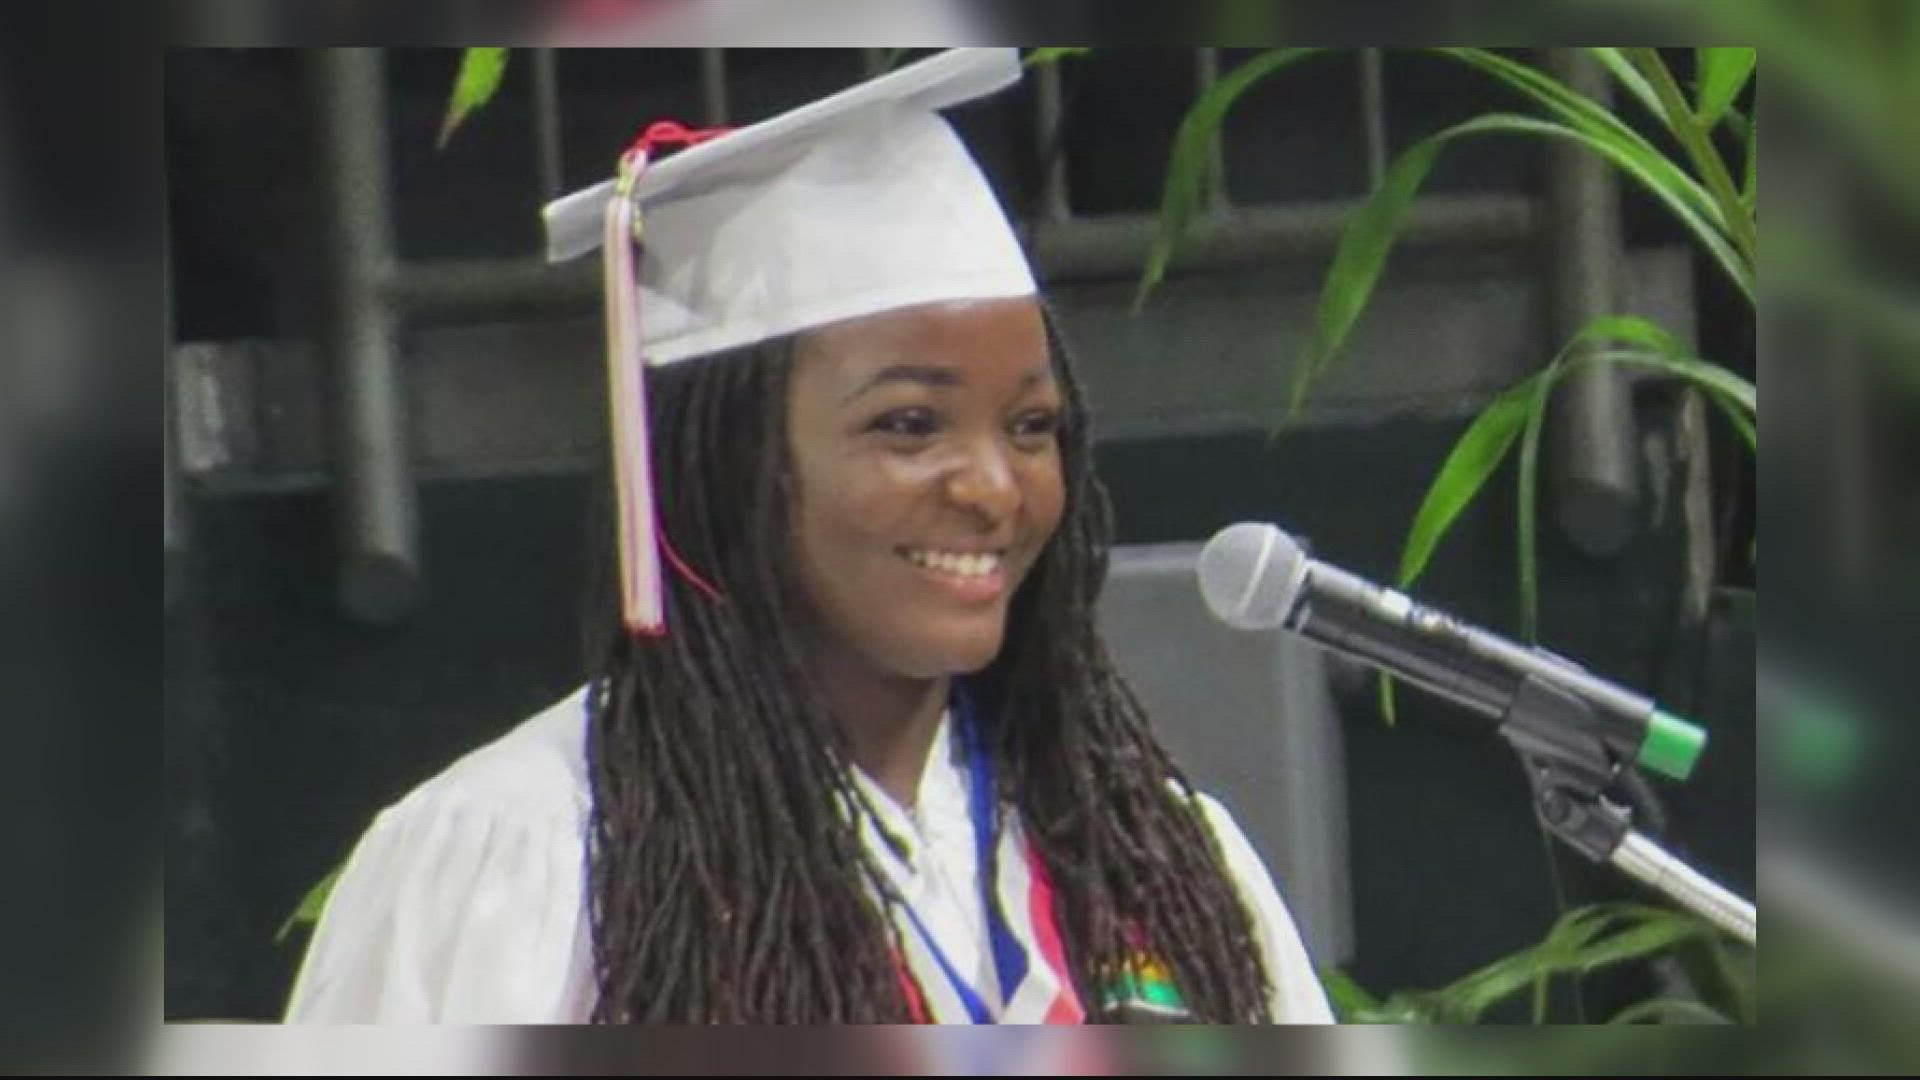 CNN reports the Ashley Adirika, a 17-year-old from Miami, got accepted to eight ivy league schools.